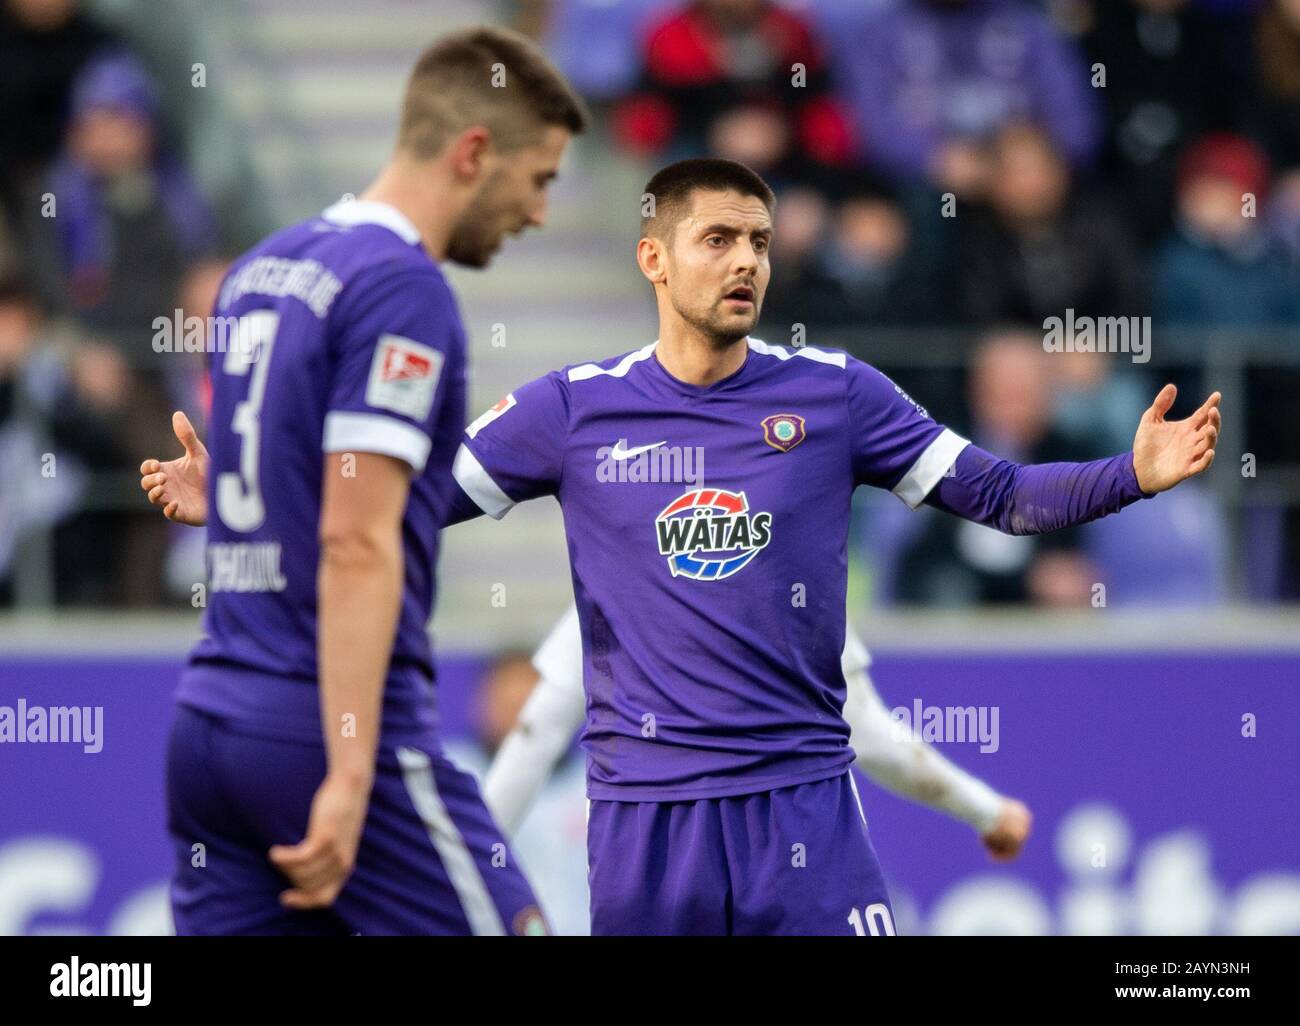 Aue, Germany. 16th Feb, 2020. Football: 2nd Bundesliga, FC Erzgebirge Aue - Holstein Kiel, 22nd matchday, at the Sparkassen-Erzgebirgsstadion. Aues Dimitrij Nazarov (r) spreads his arms next to Marko Mihojevic. Credit: Robert Michael/dpa-Zentralbild/dpa - IMPORTANT NOTE: In accordance with the regulations of the DFL Deutsche Fußball Liga and the DFB Deutscher Fußball-Bund, it is prohibited to exploit or have exploited in the stadium and/or from the game taken photographs in the form of sequence images and/or video-like photo series./dpa/Alamy Live News Stock Photo